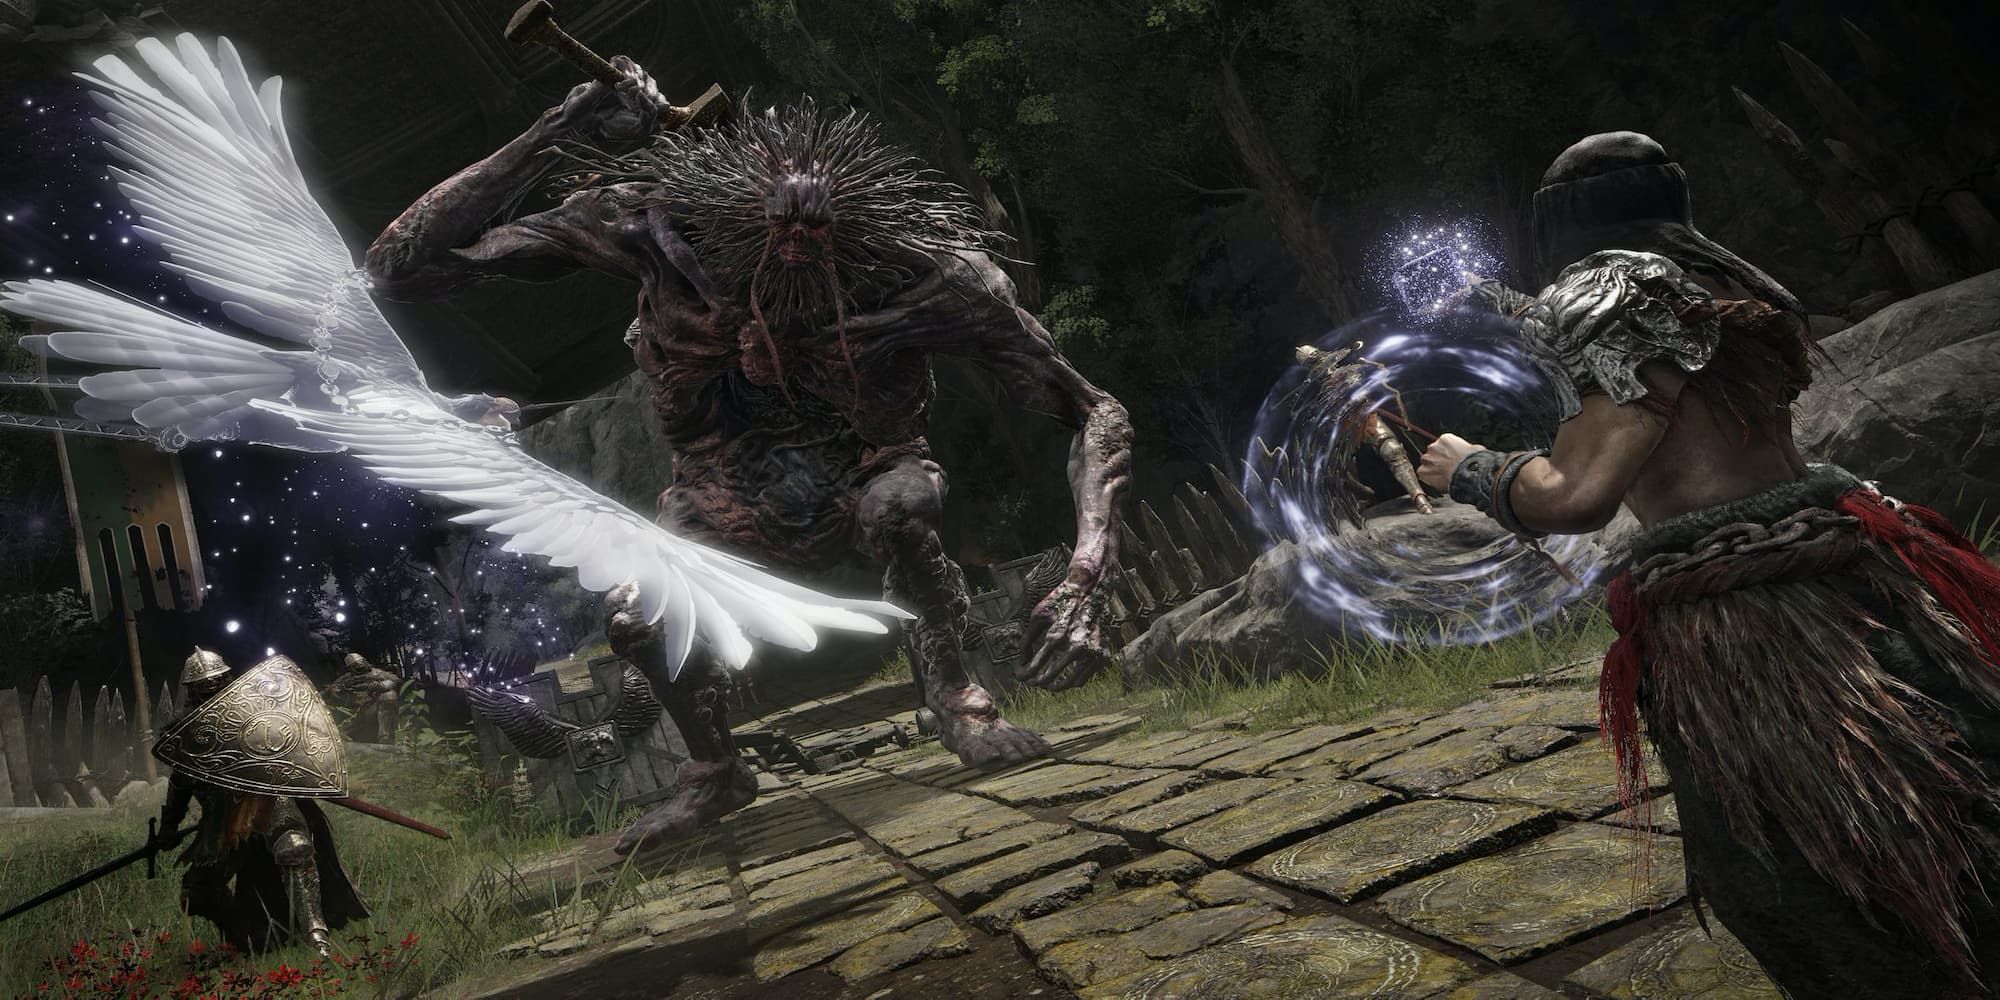 Elden Ring player casts a spell on enemies